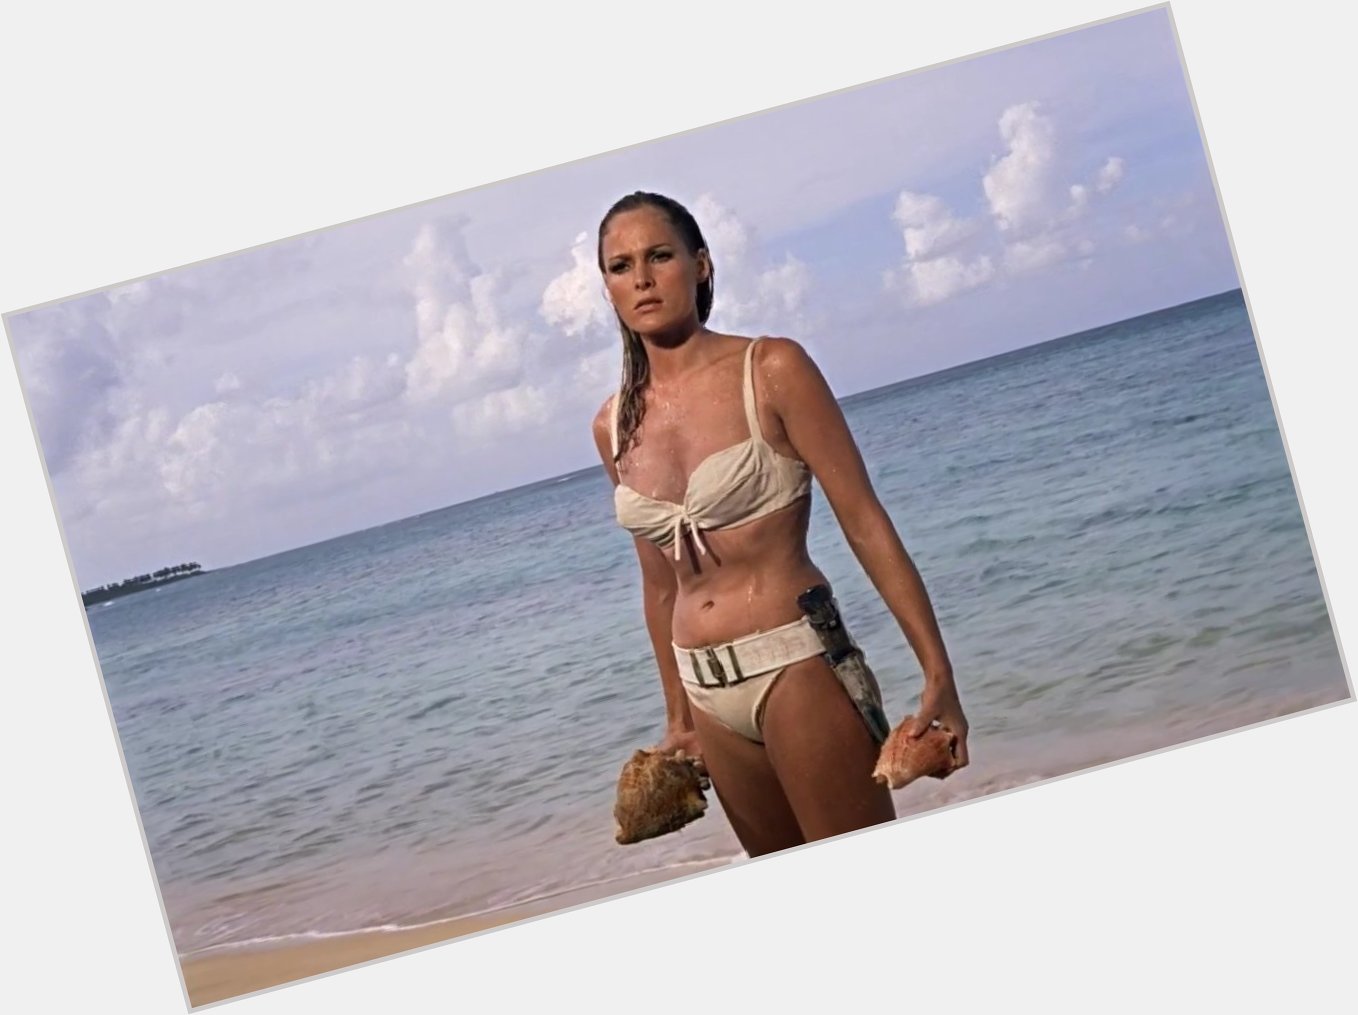 Happy birthday to Ursula Andress who played Honey Ryder in Dr. No!

19 March 